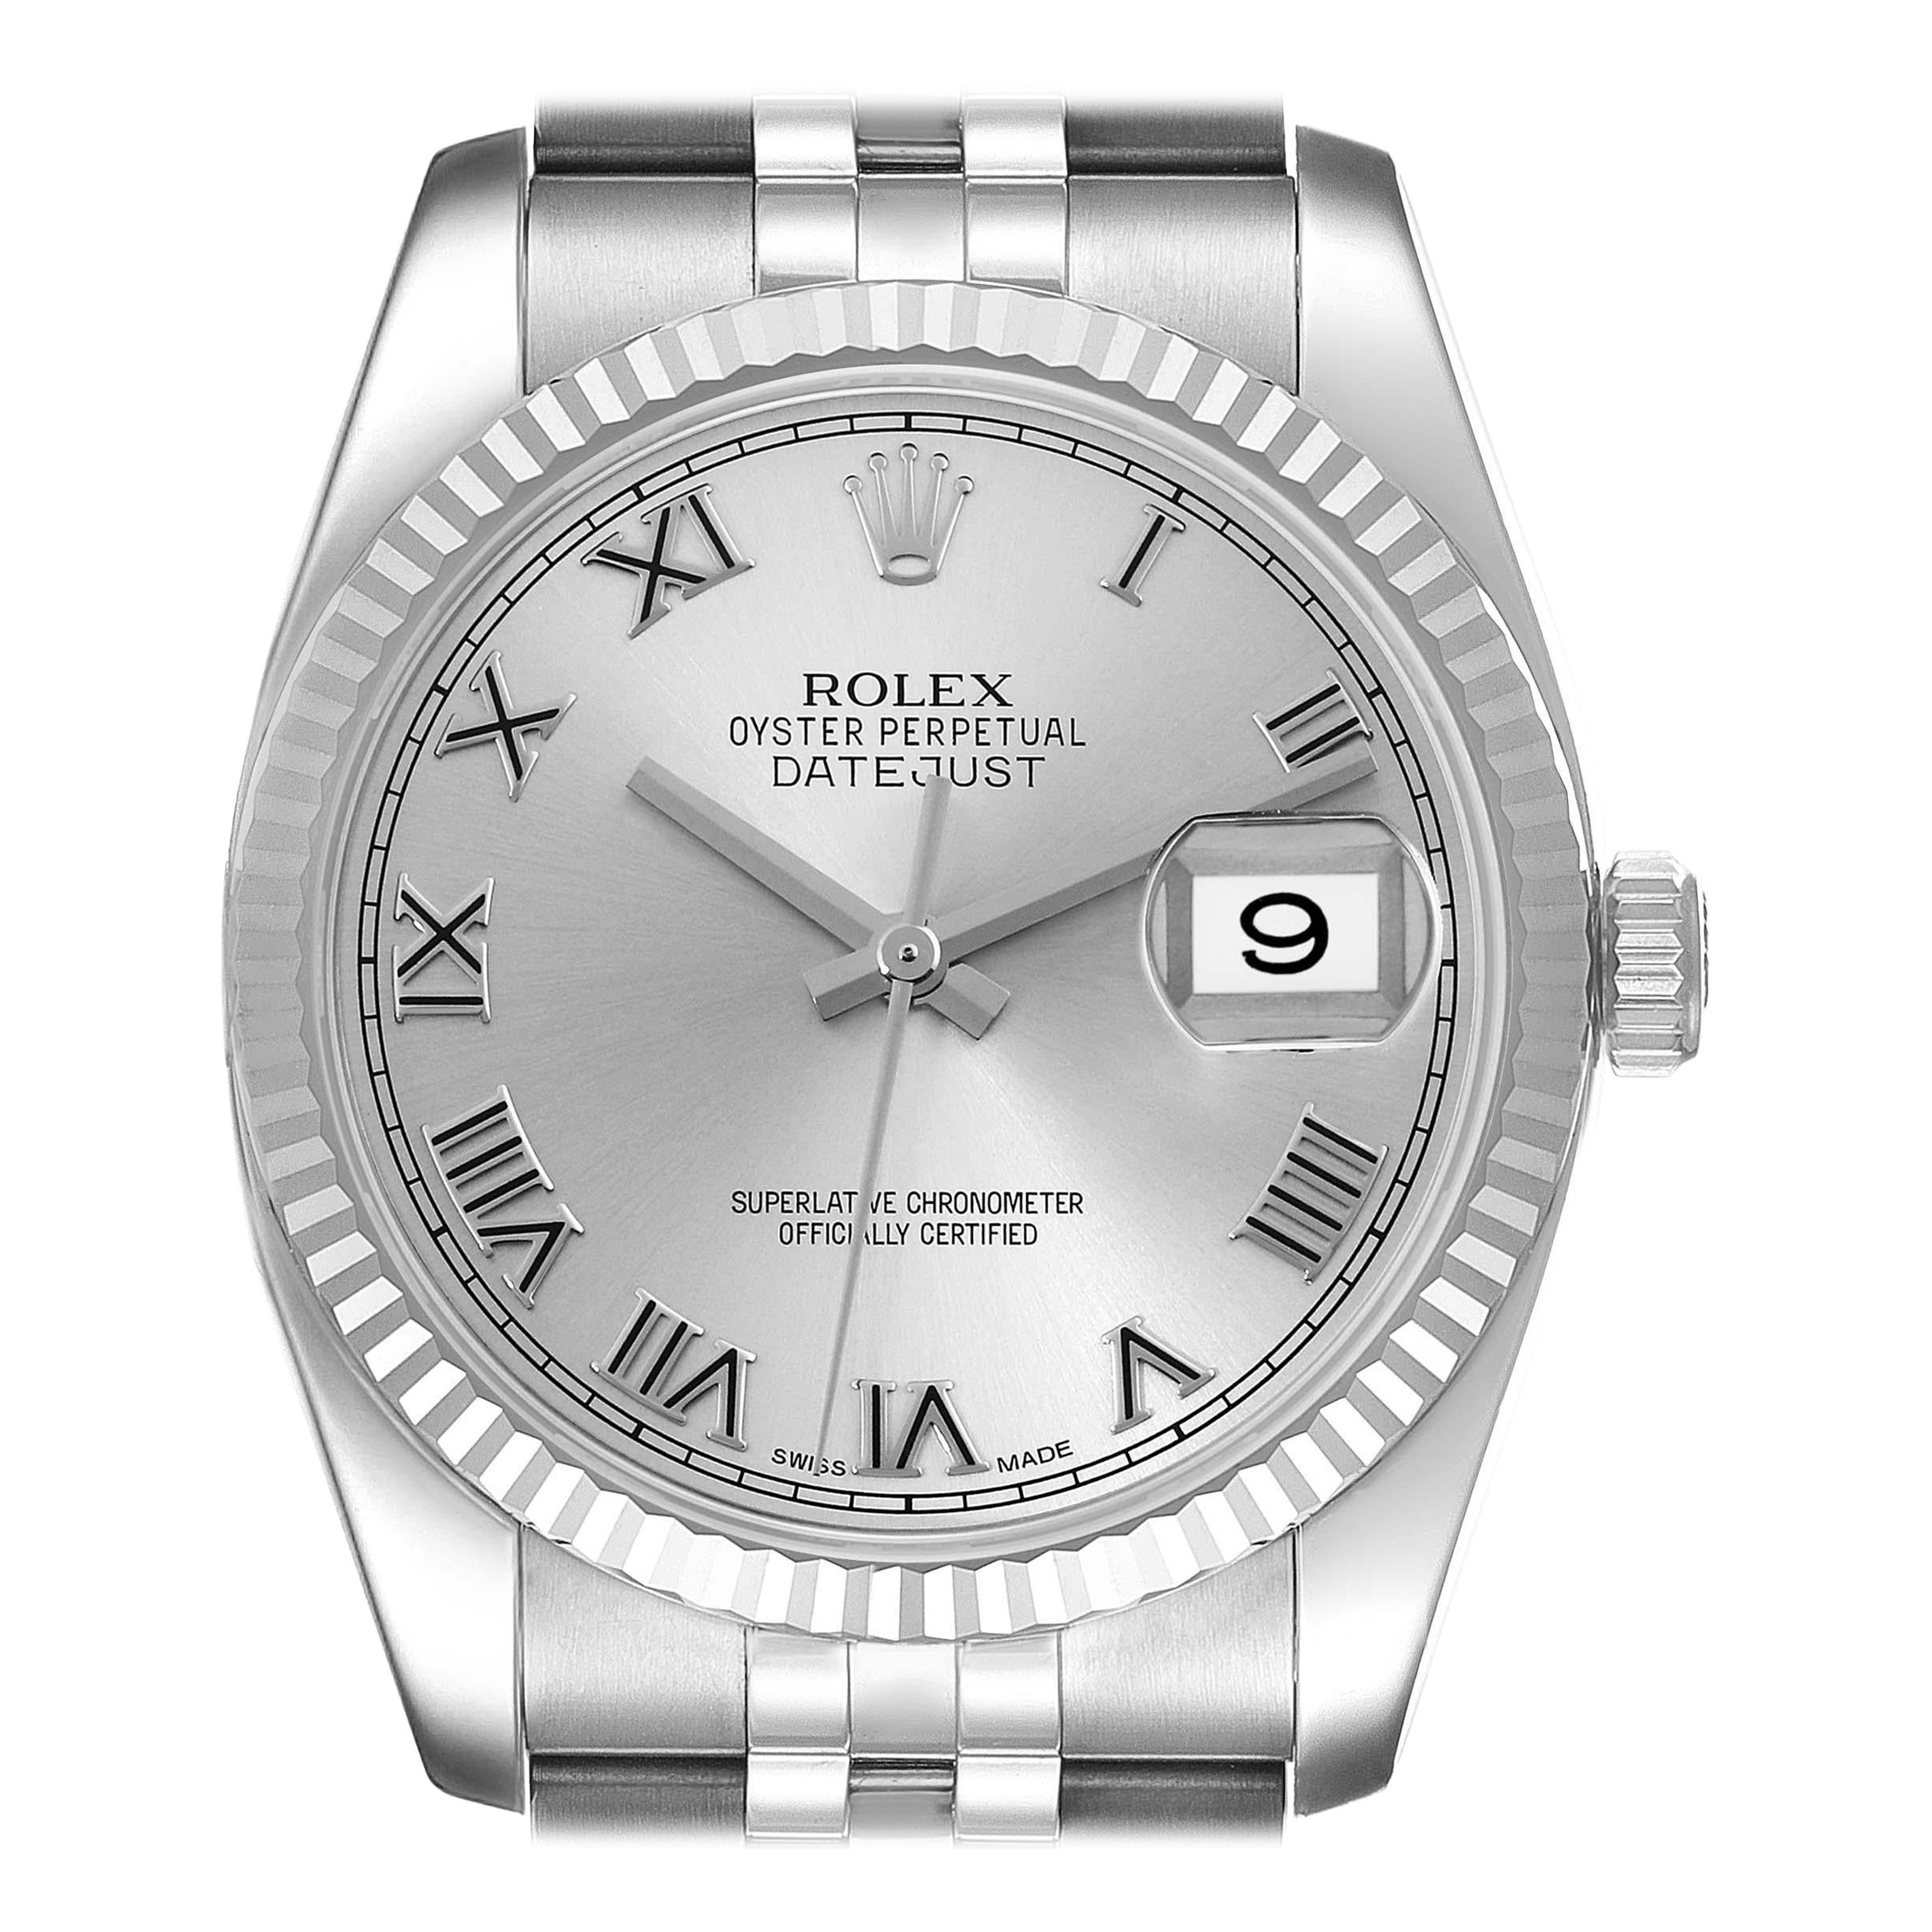 Rolex Datejust Steel White Gold Silver Roman Dial Mens Watch 116234 For Sale